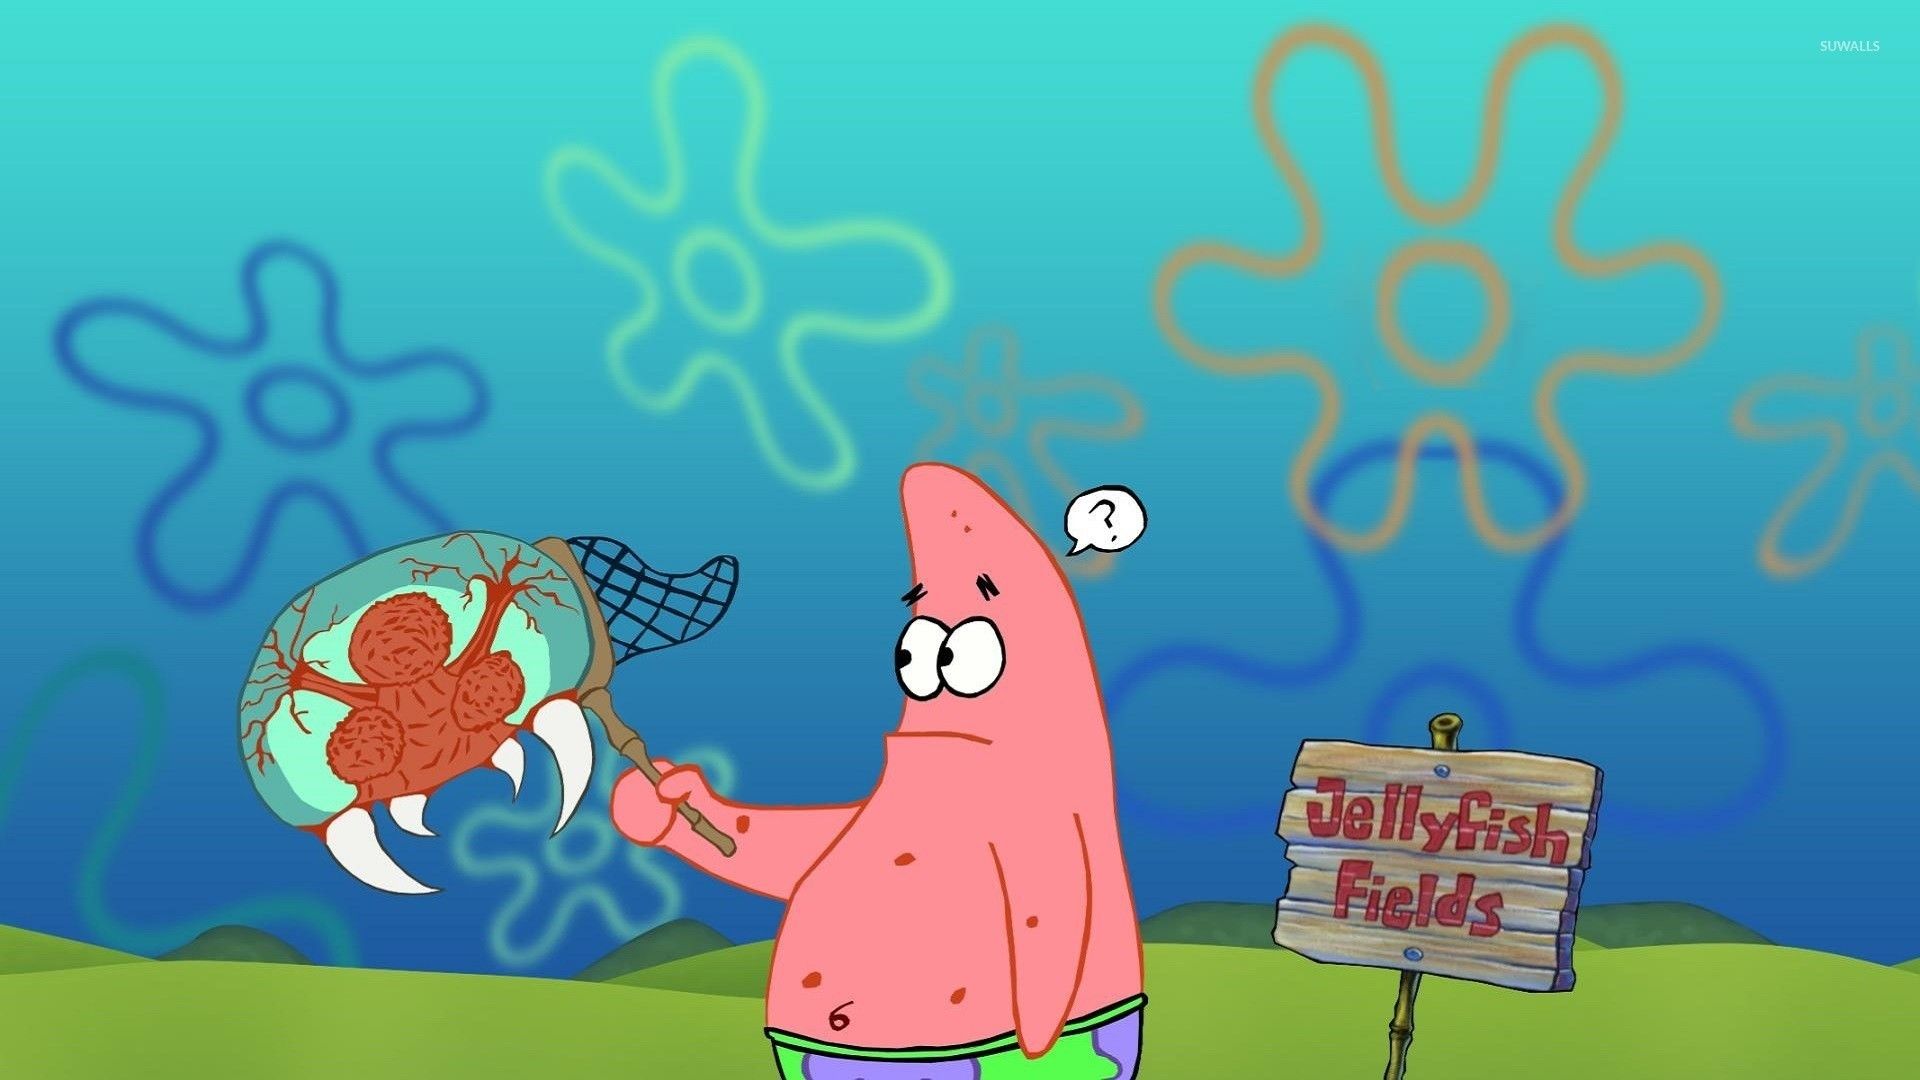 Patrick Star, from the popular animated television series Spongebob Squarepants, is holding a jellyfish in his hand. - Squidward